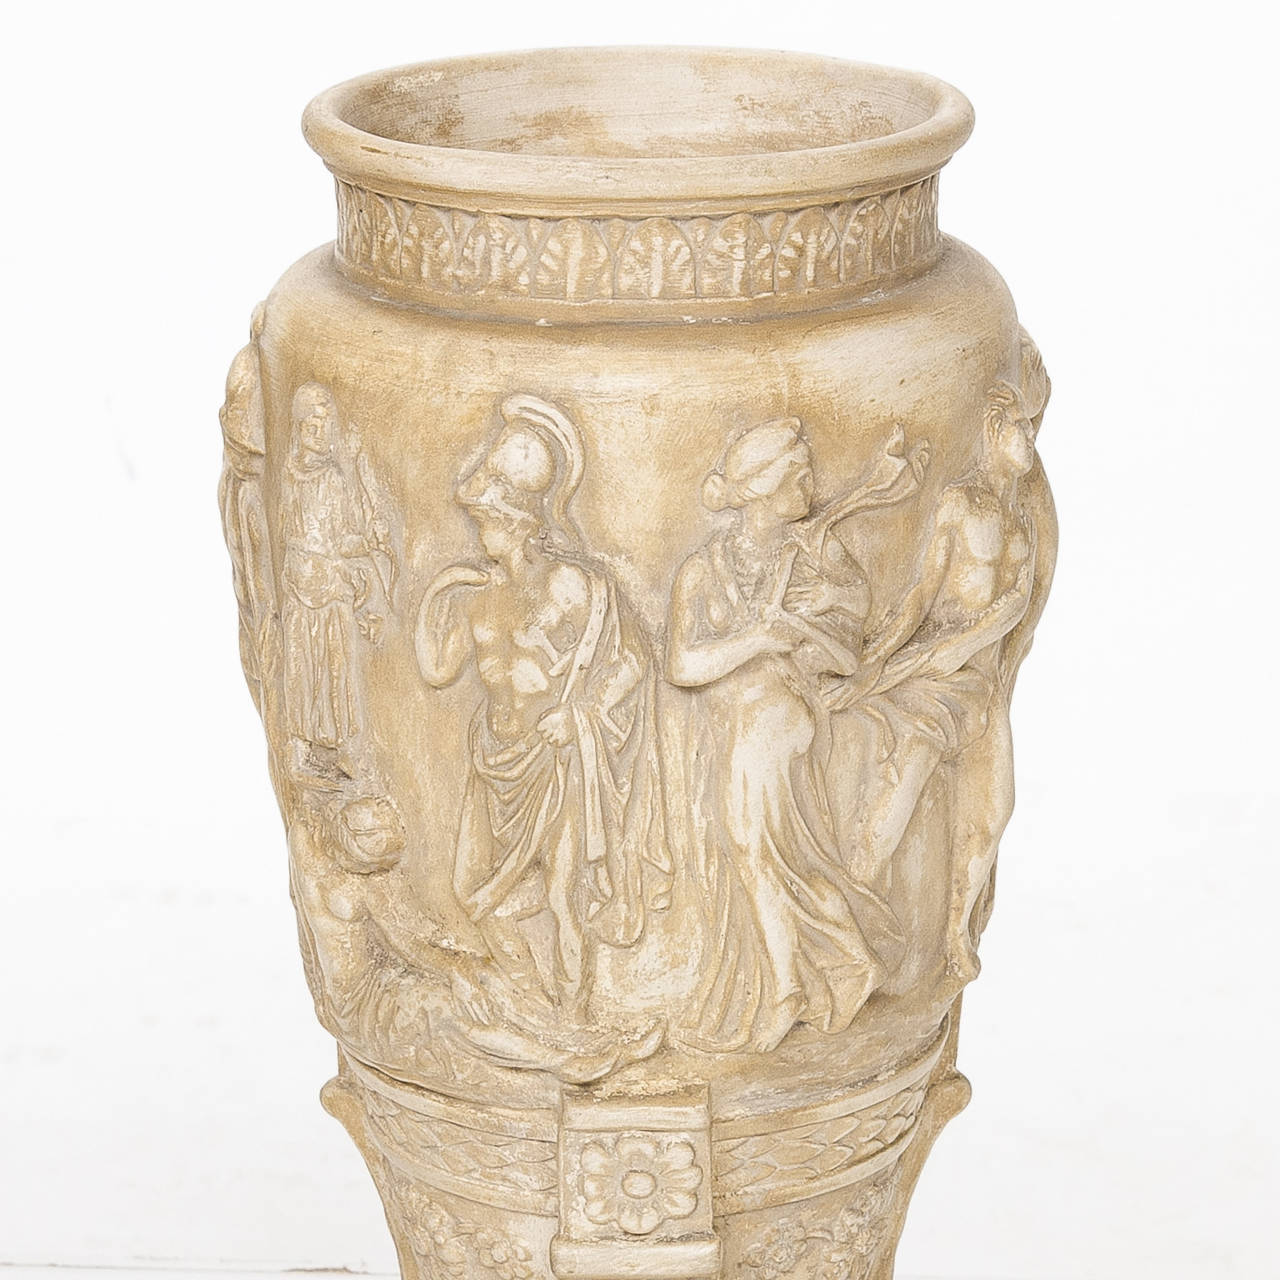 Pair of Italian neoclassical urns.

These urns purchased in Italy are made of a terra cotta with a cream hue. These are made to excellent quality. Very unique and create a wonderful appearance. Designed with ladies and men dressed in flowing